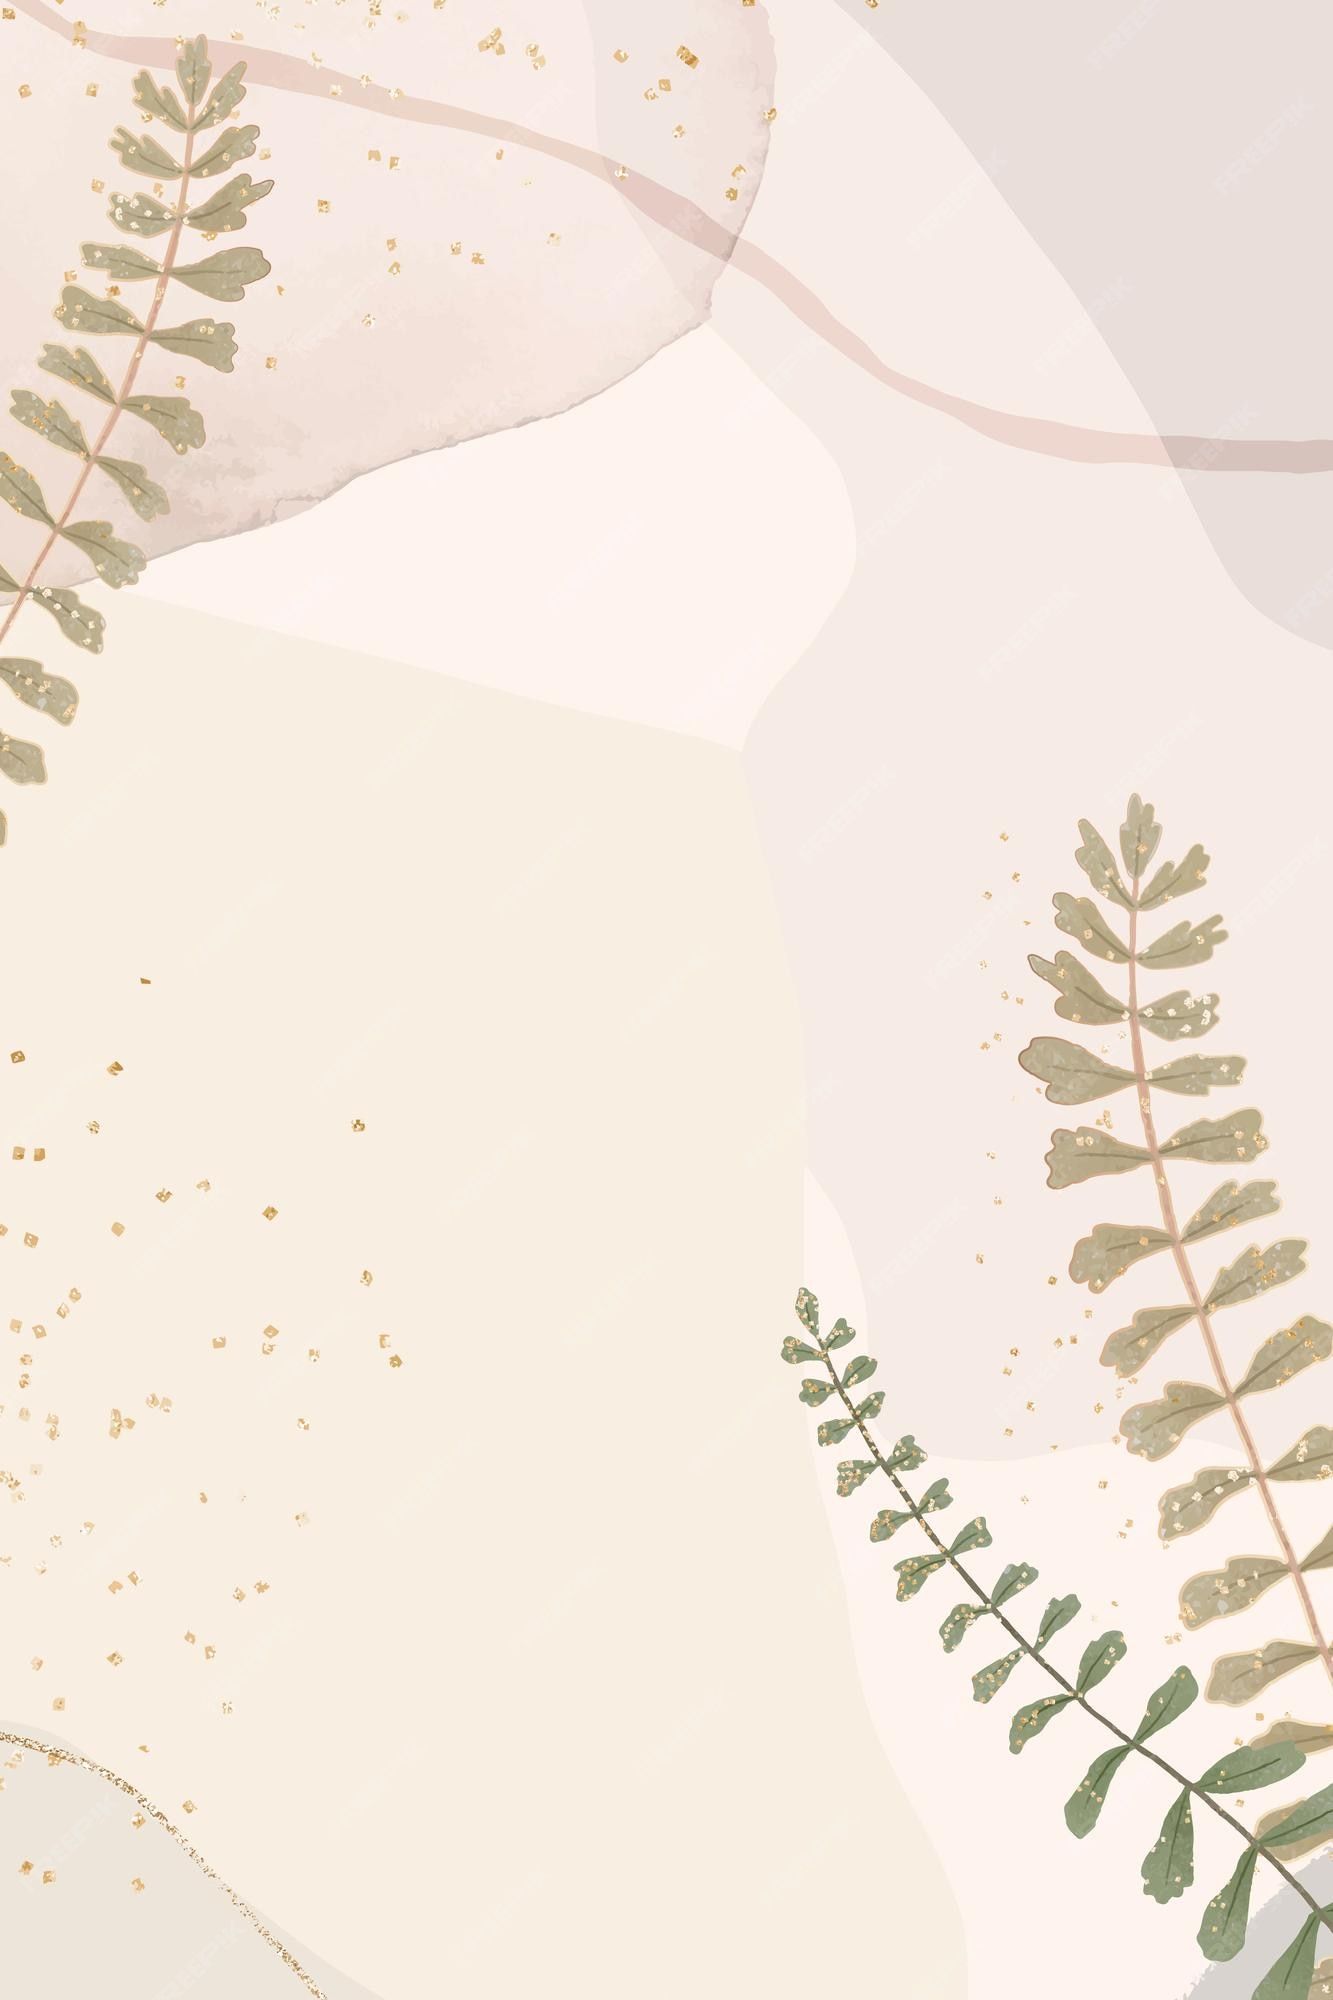 Neutral aesthetic wallpaper Vectors & Illustrations for Free Download